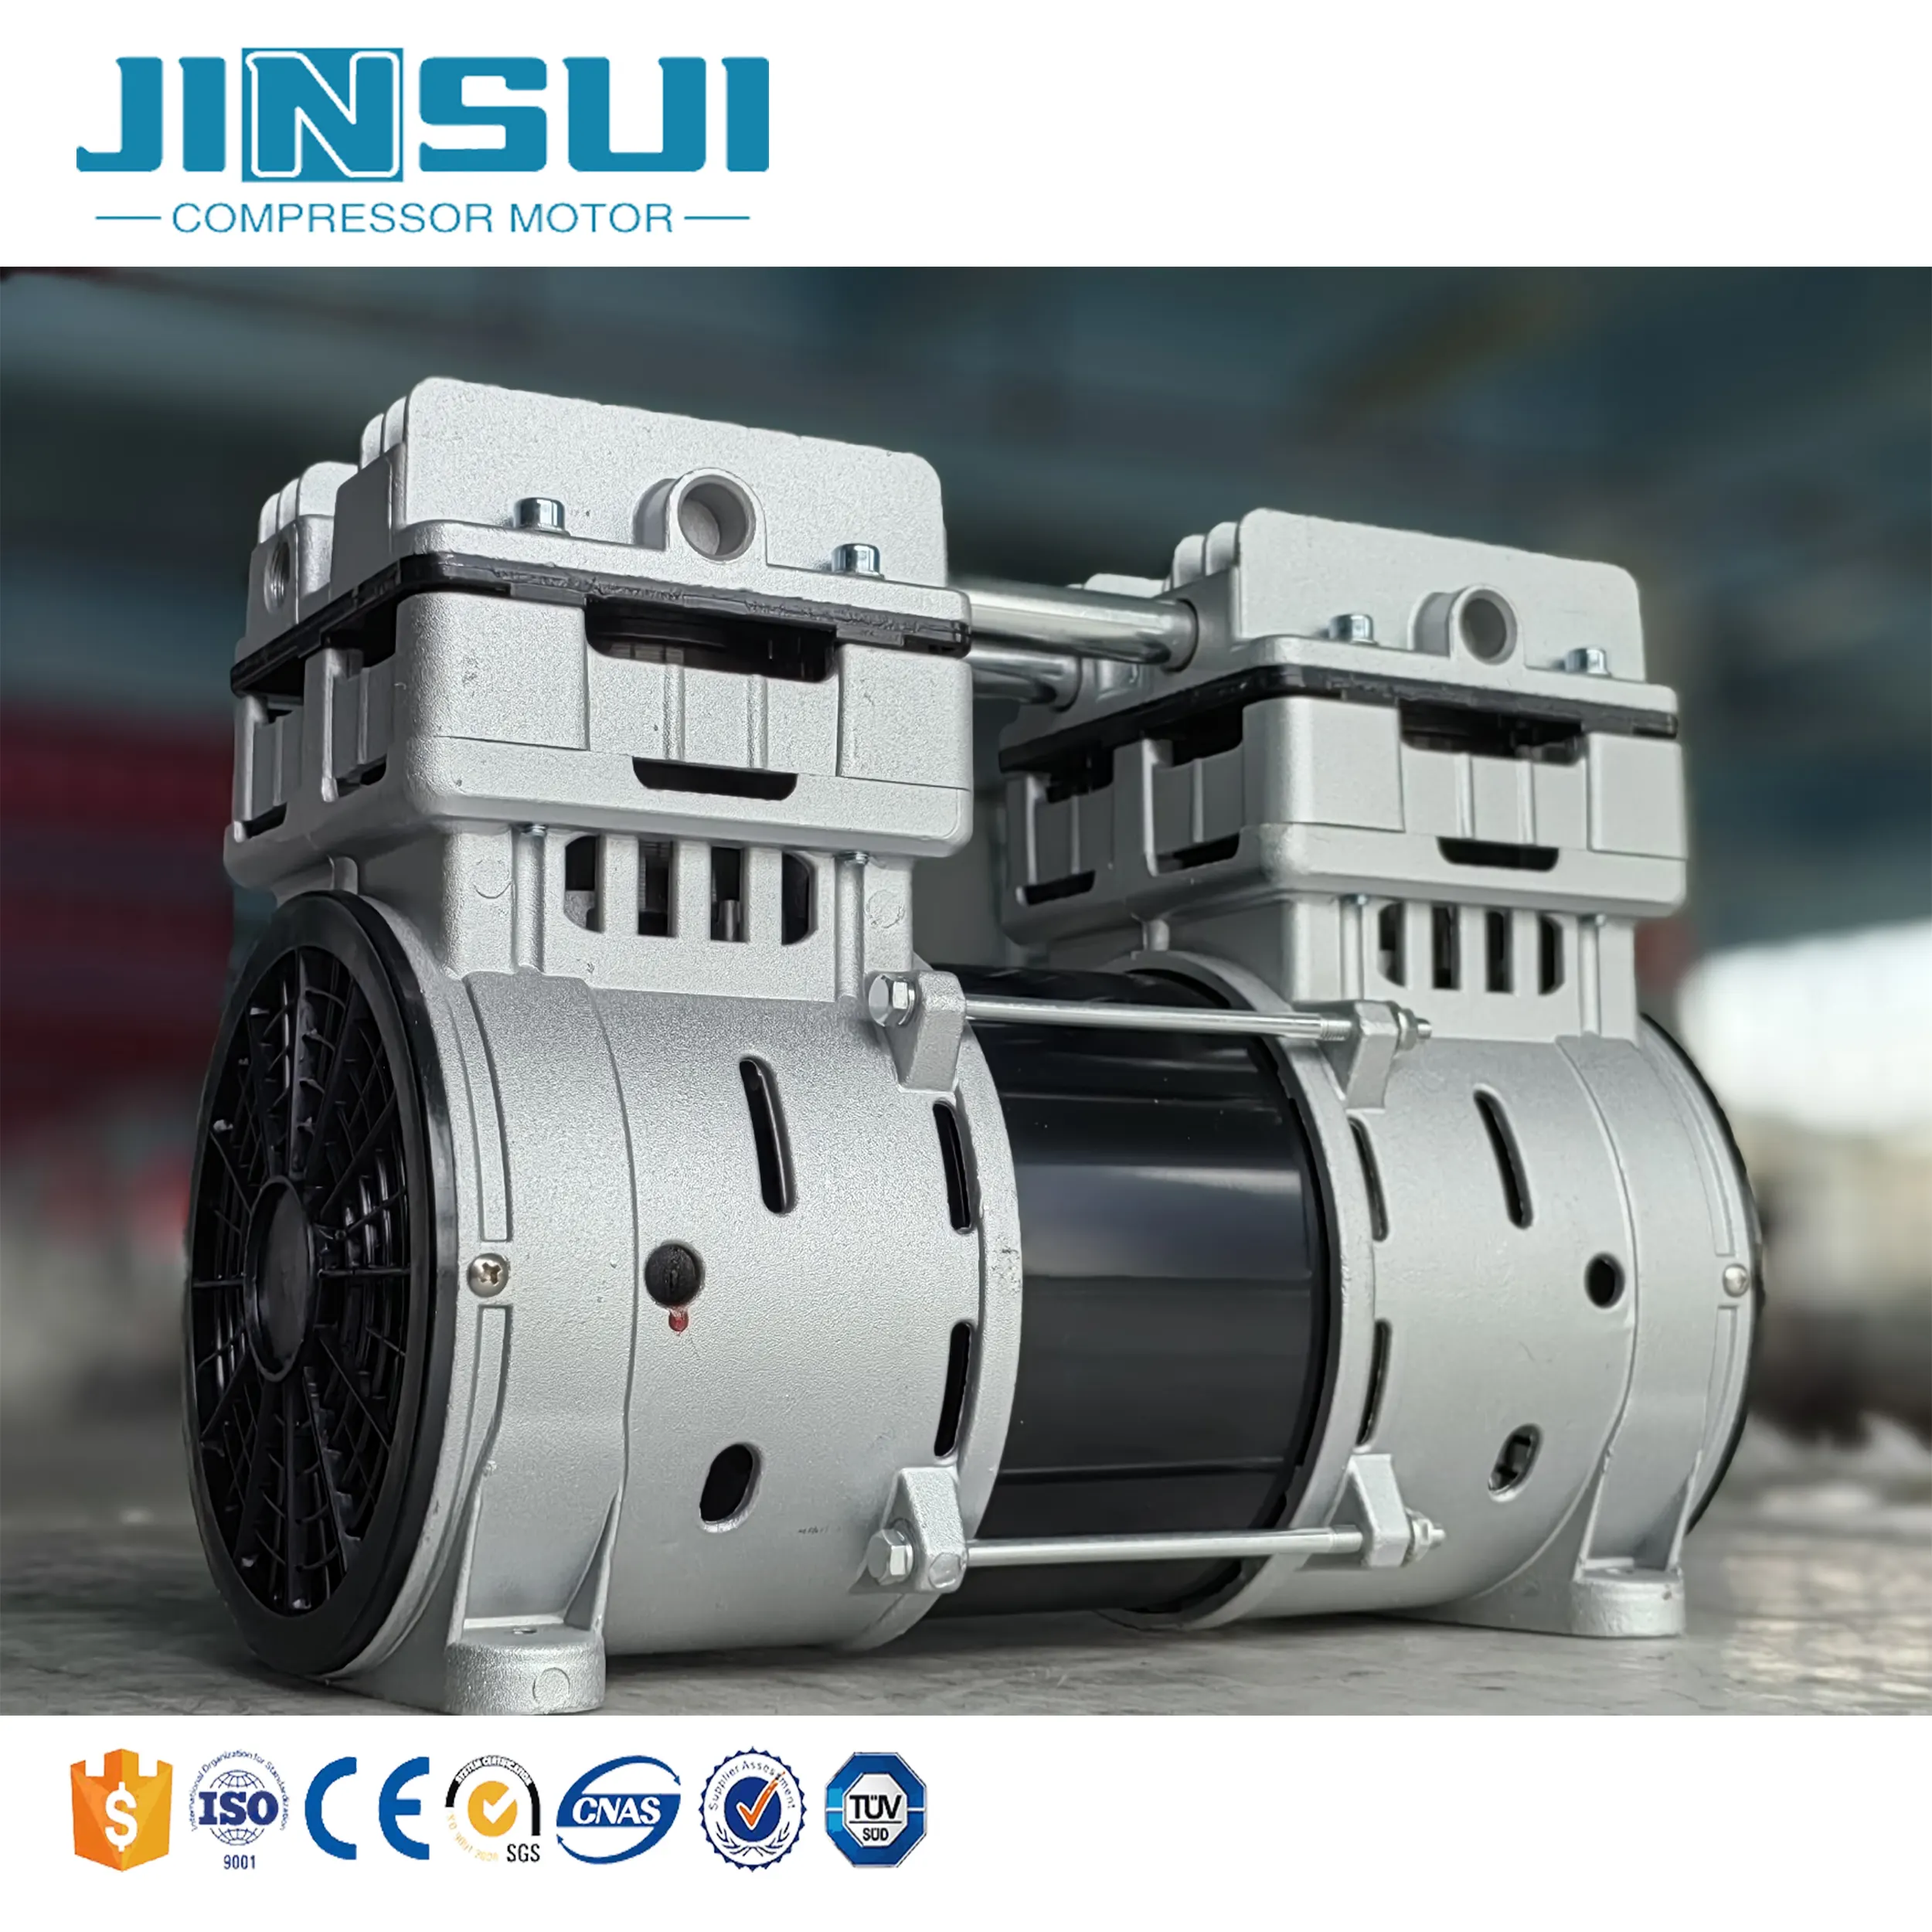 Electric vacuum pump for household cotton quilt compression and storage, industrial vacuum pump for automatic vacuuming